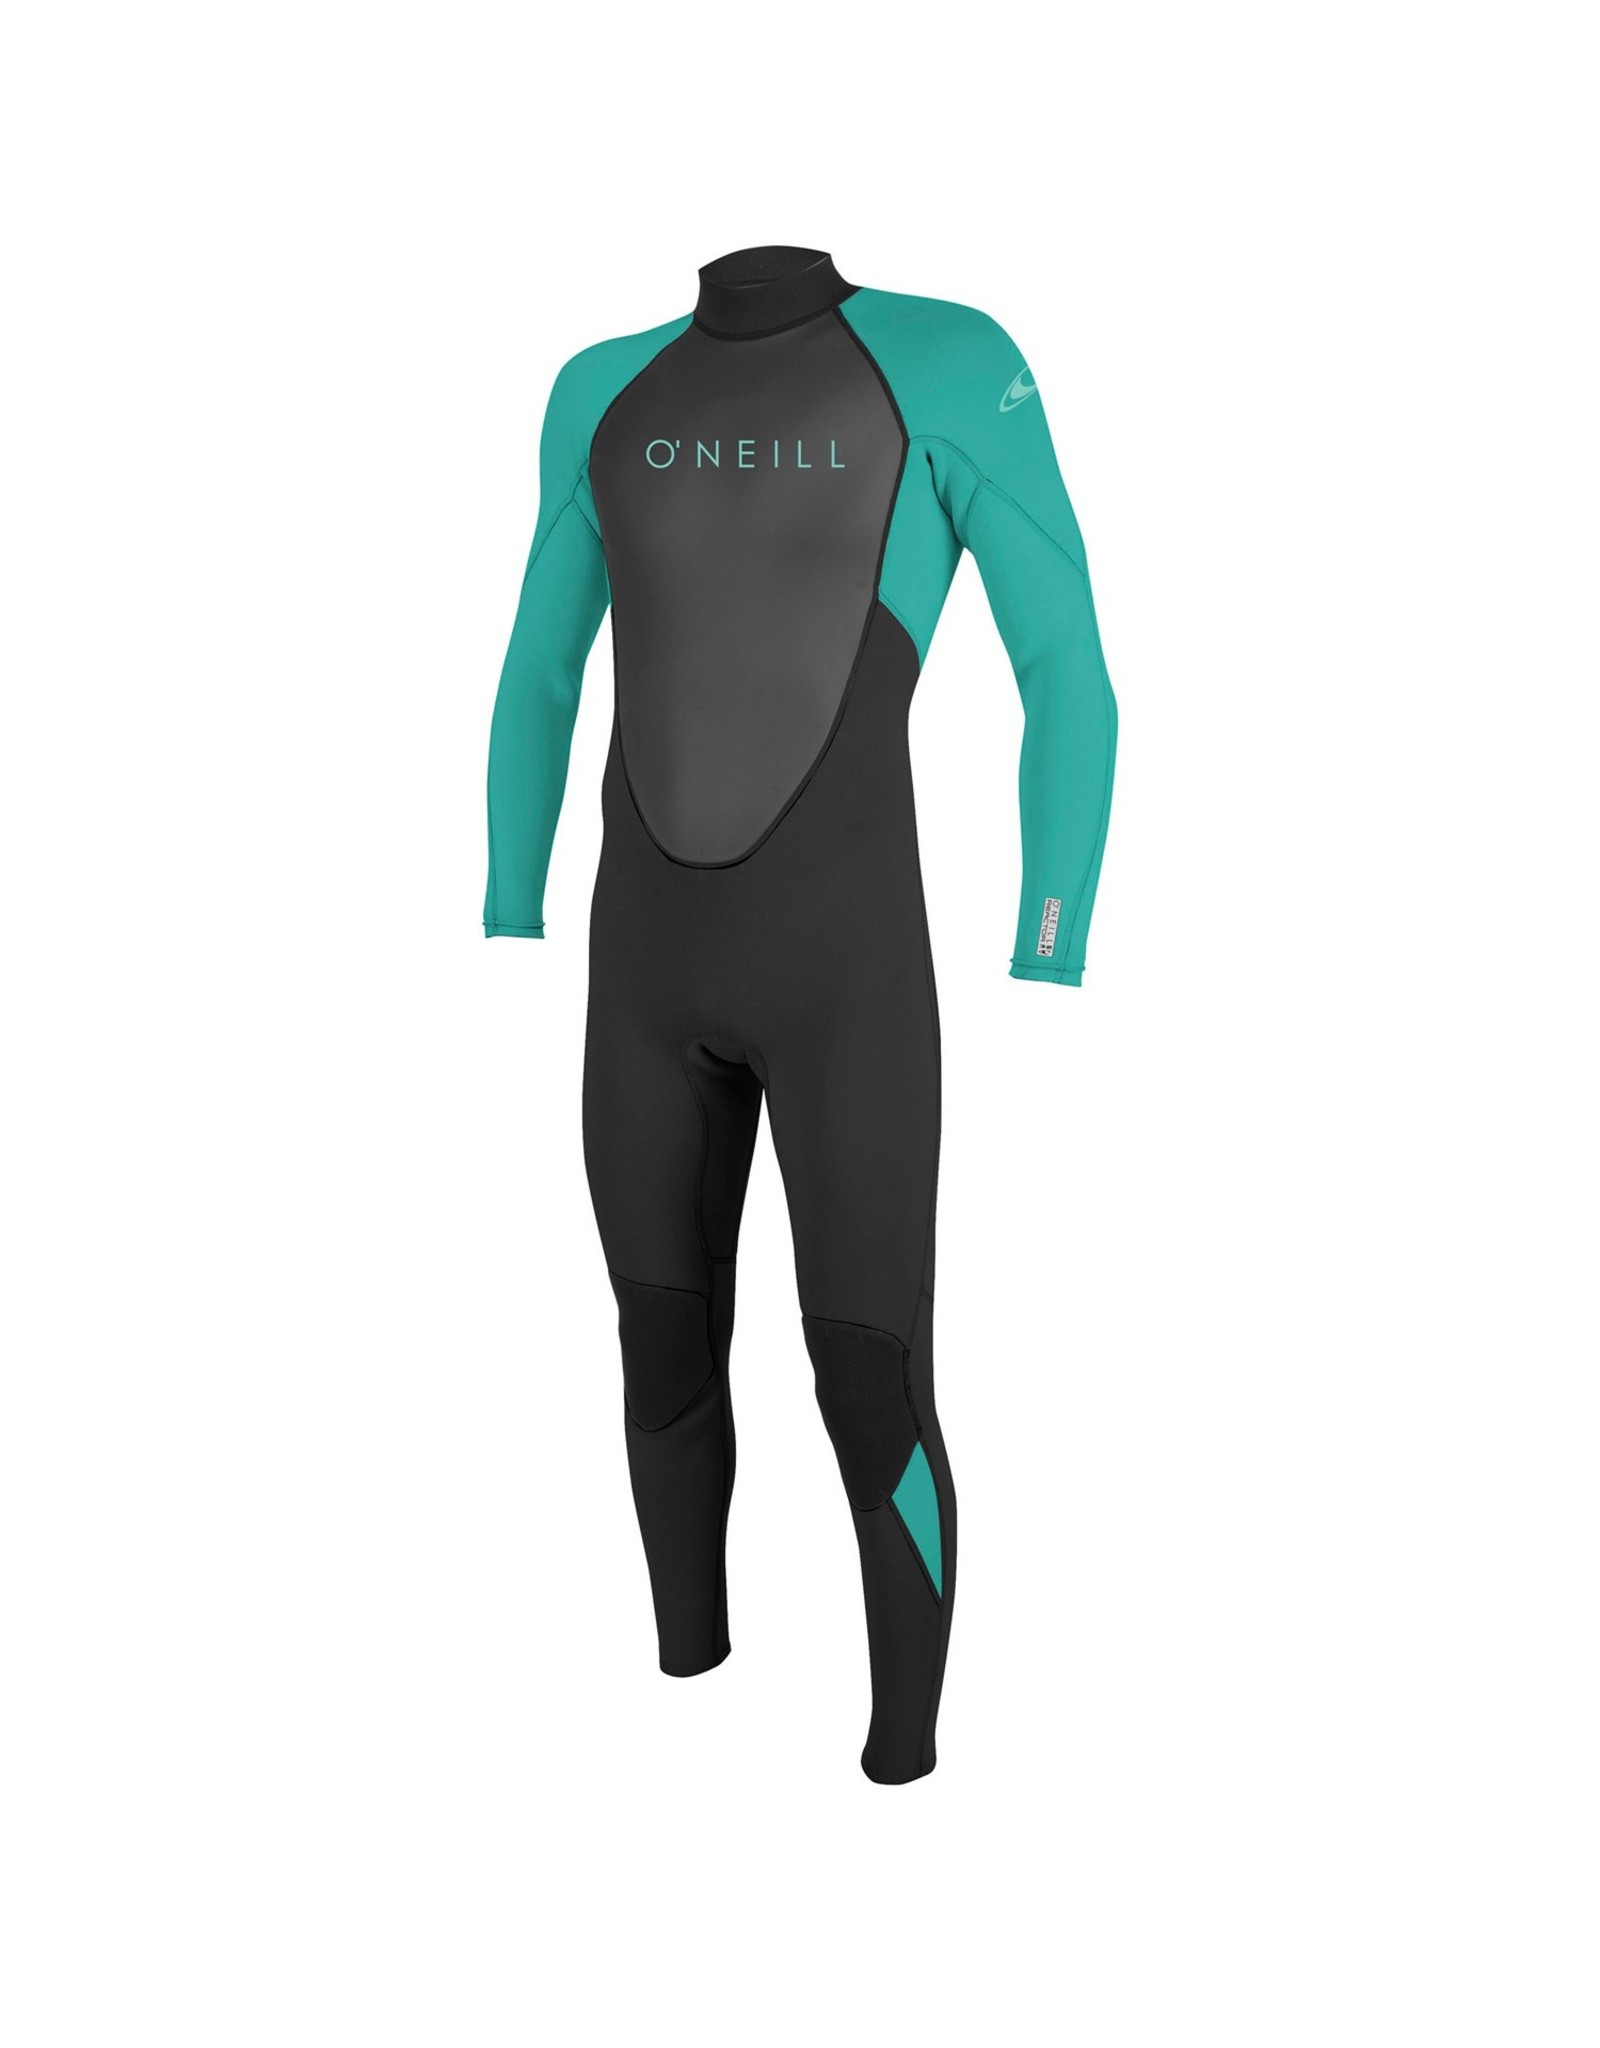 O'Neill Youth Reactor-2 3/2mm Wetsuit - Teal/Black